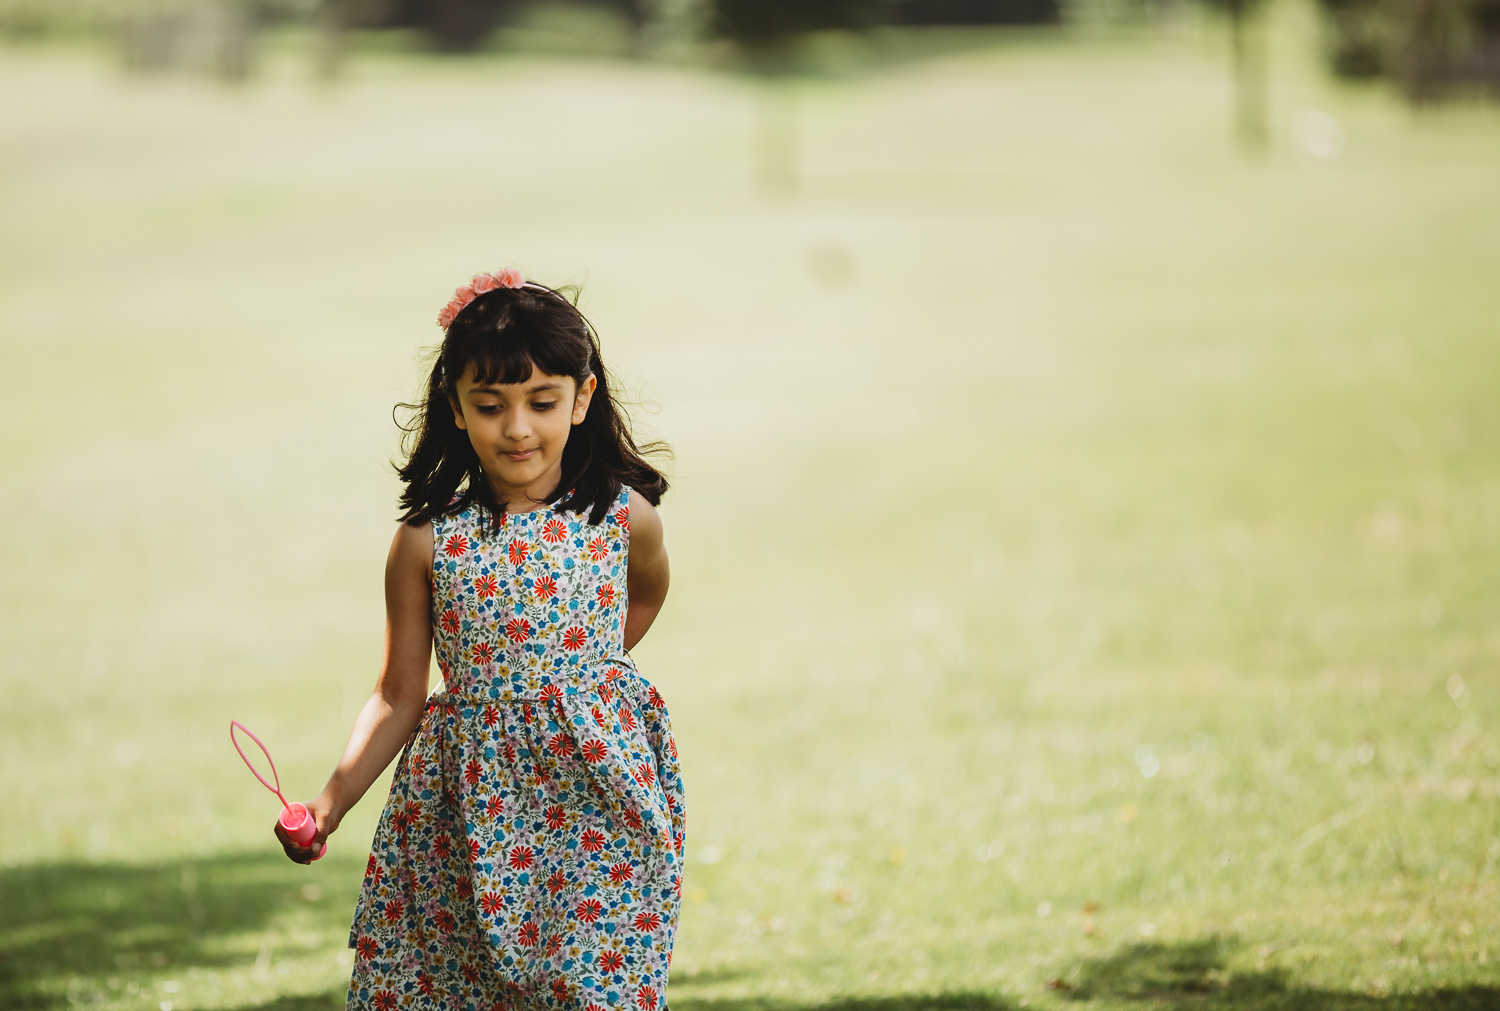 little girl of 4 walking confidently in a park